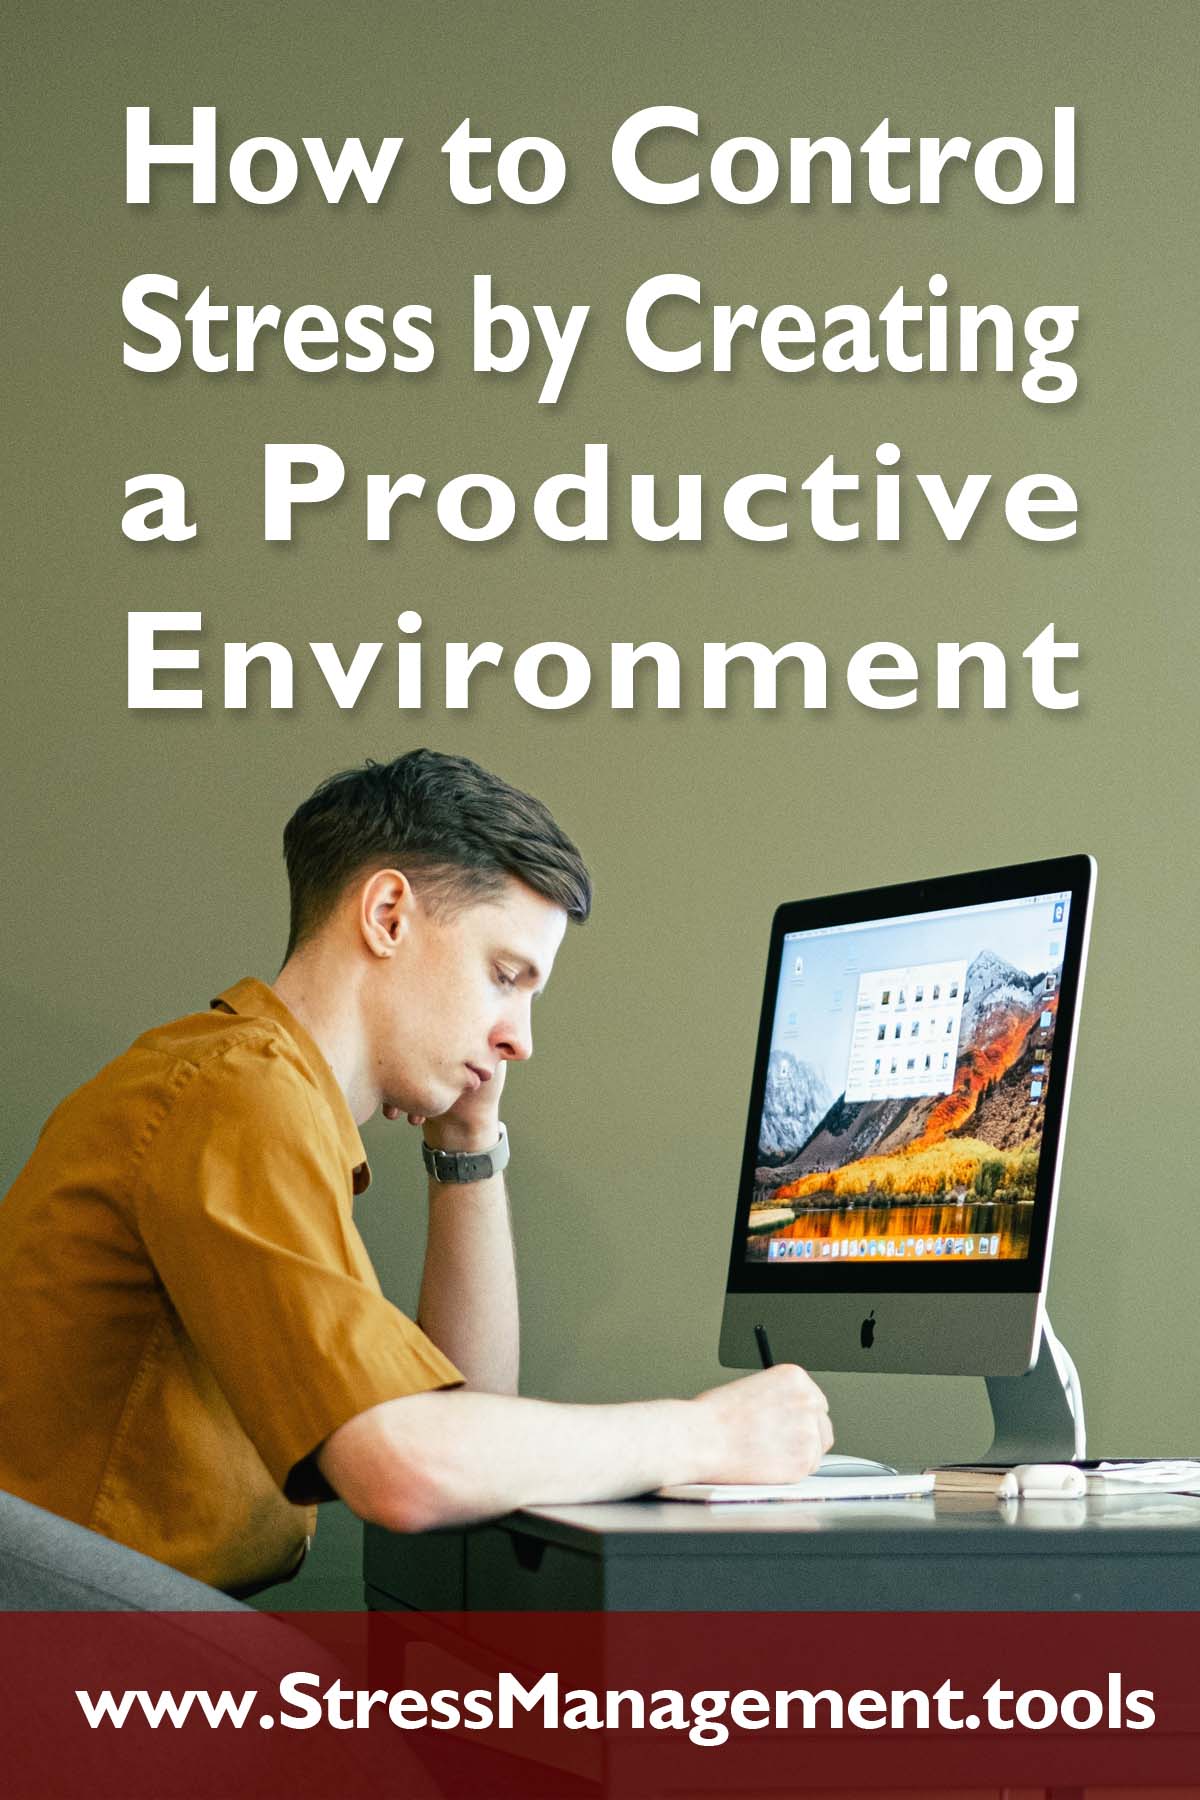 How to Control Stress by Creating a Productive Environment